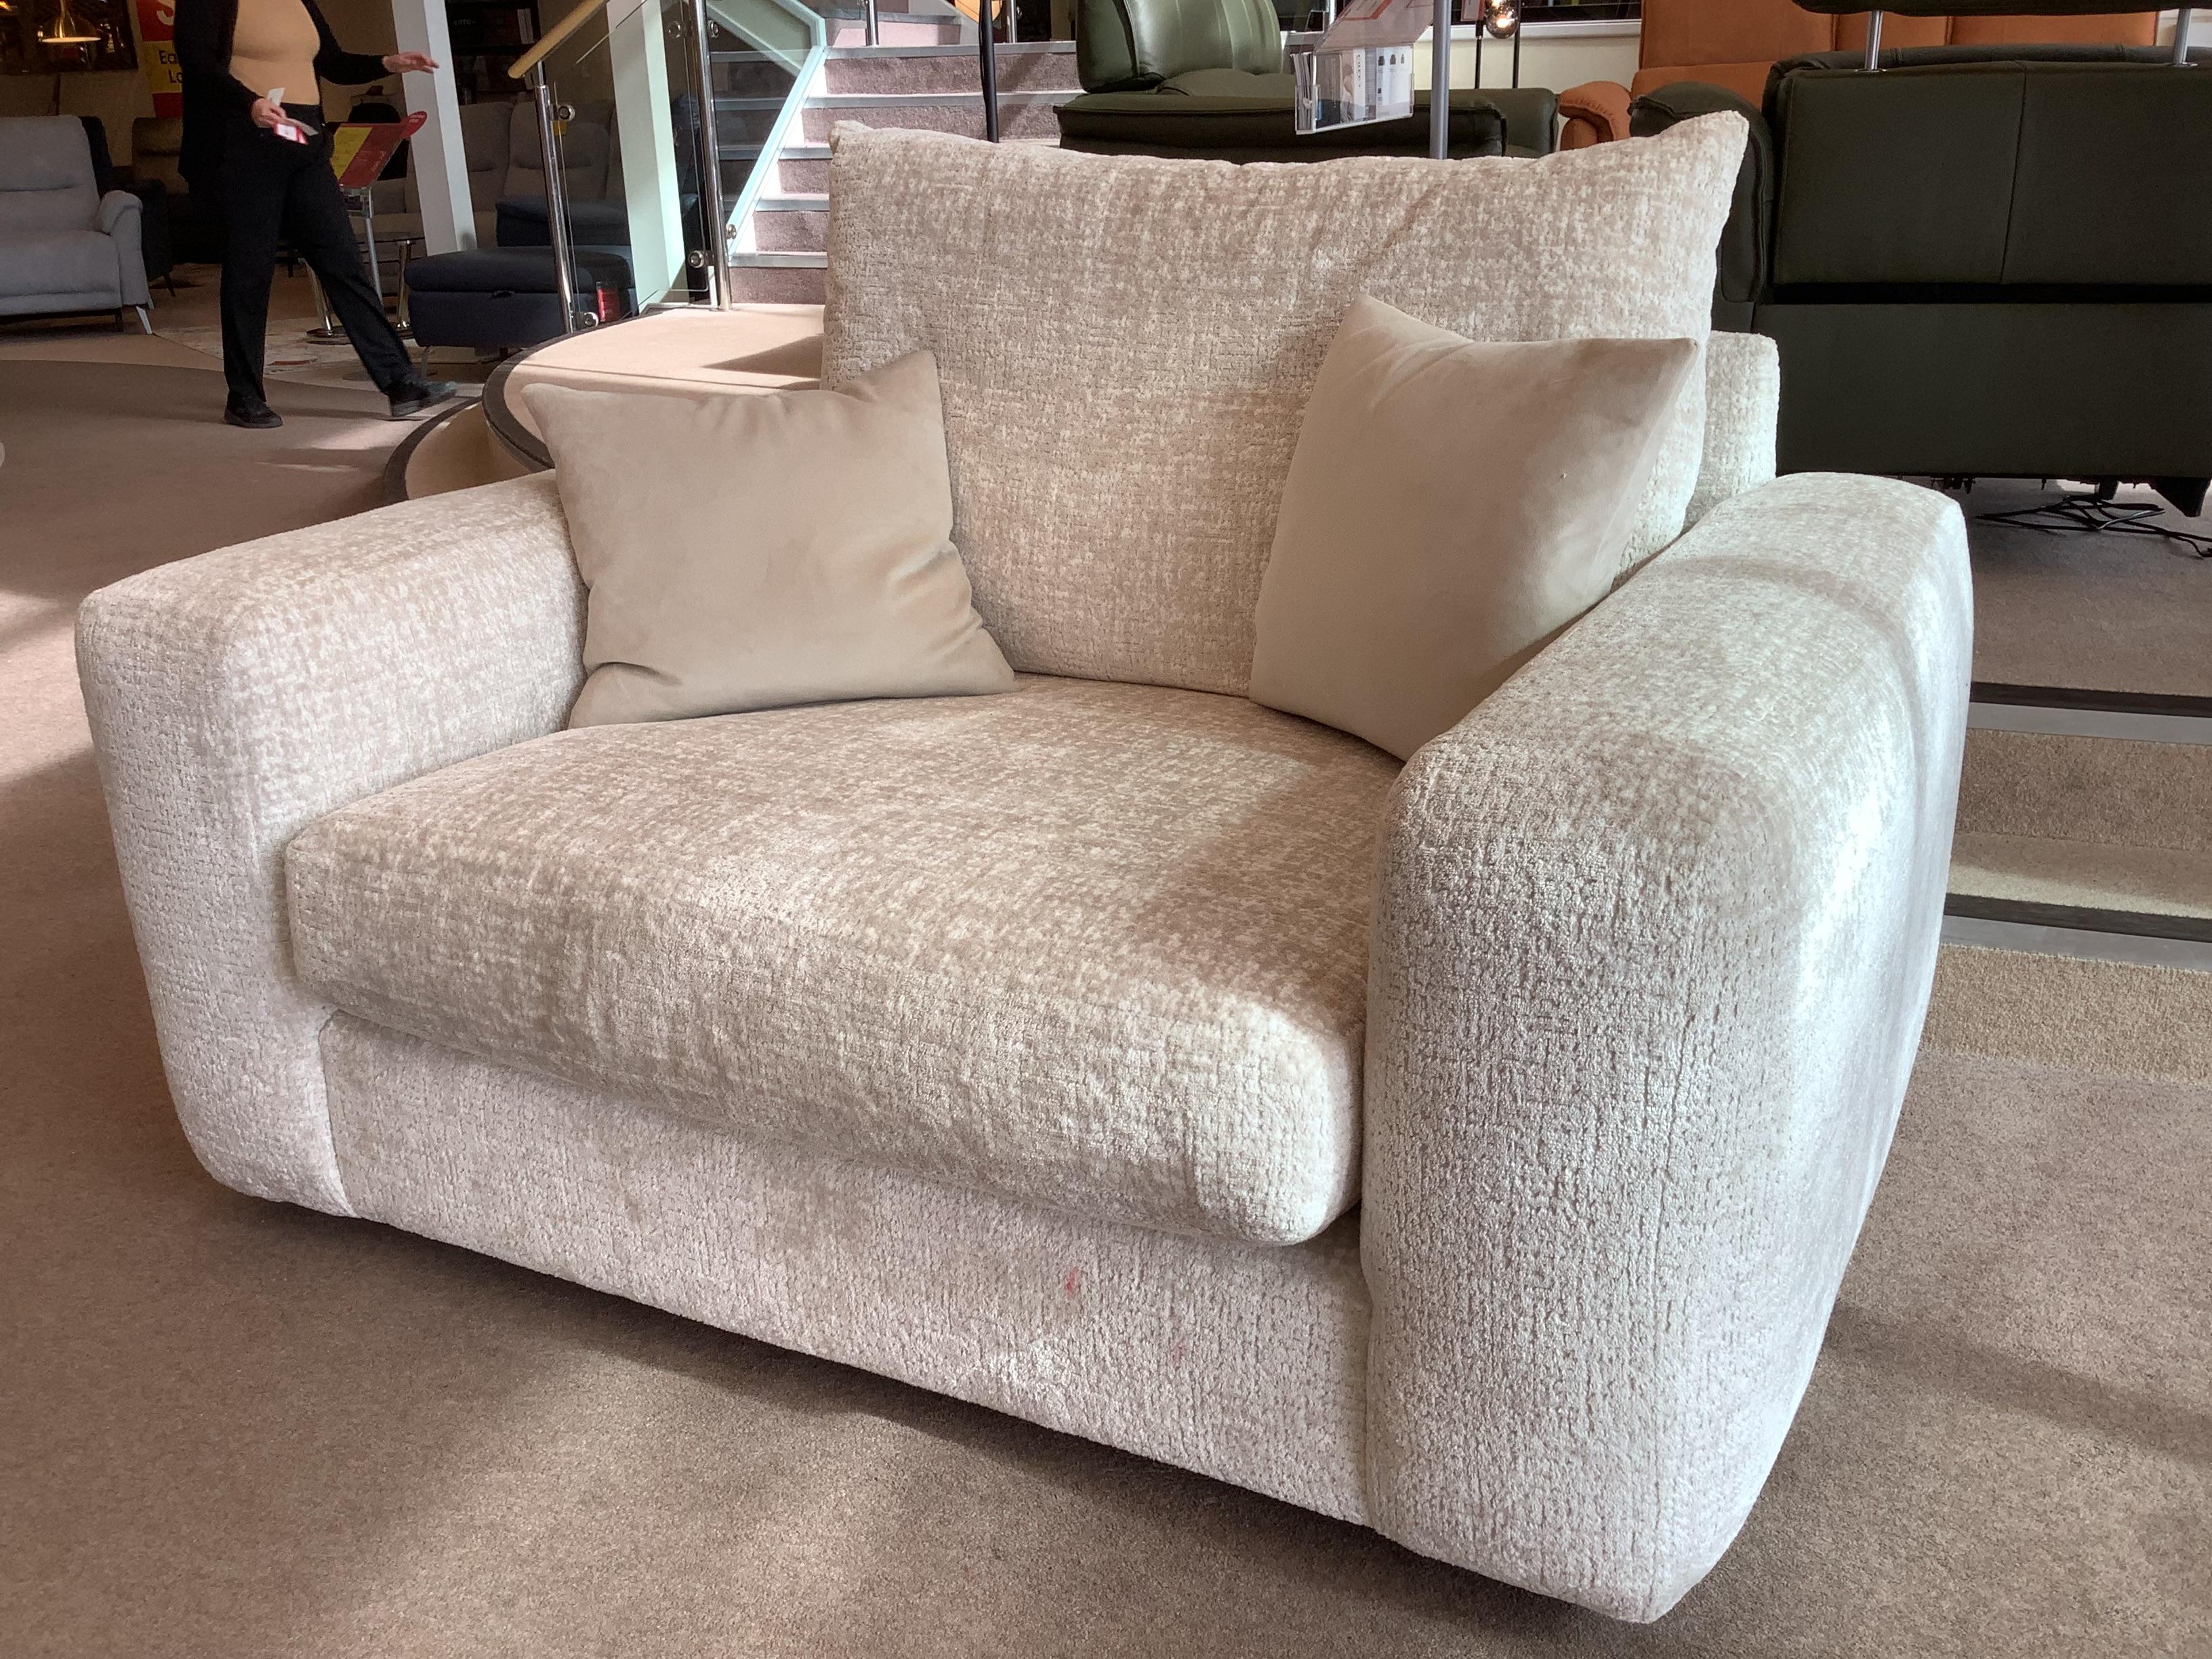 Pandora snuggler chair with Rug in  on Furniture Village